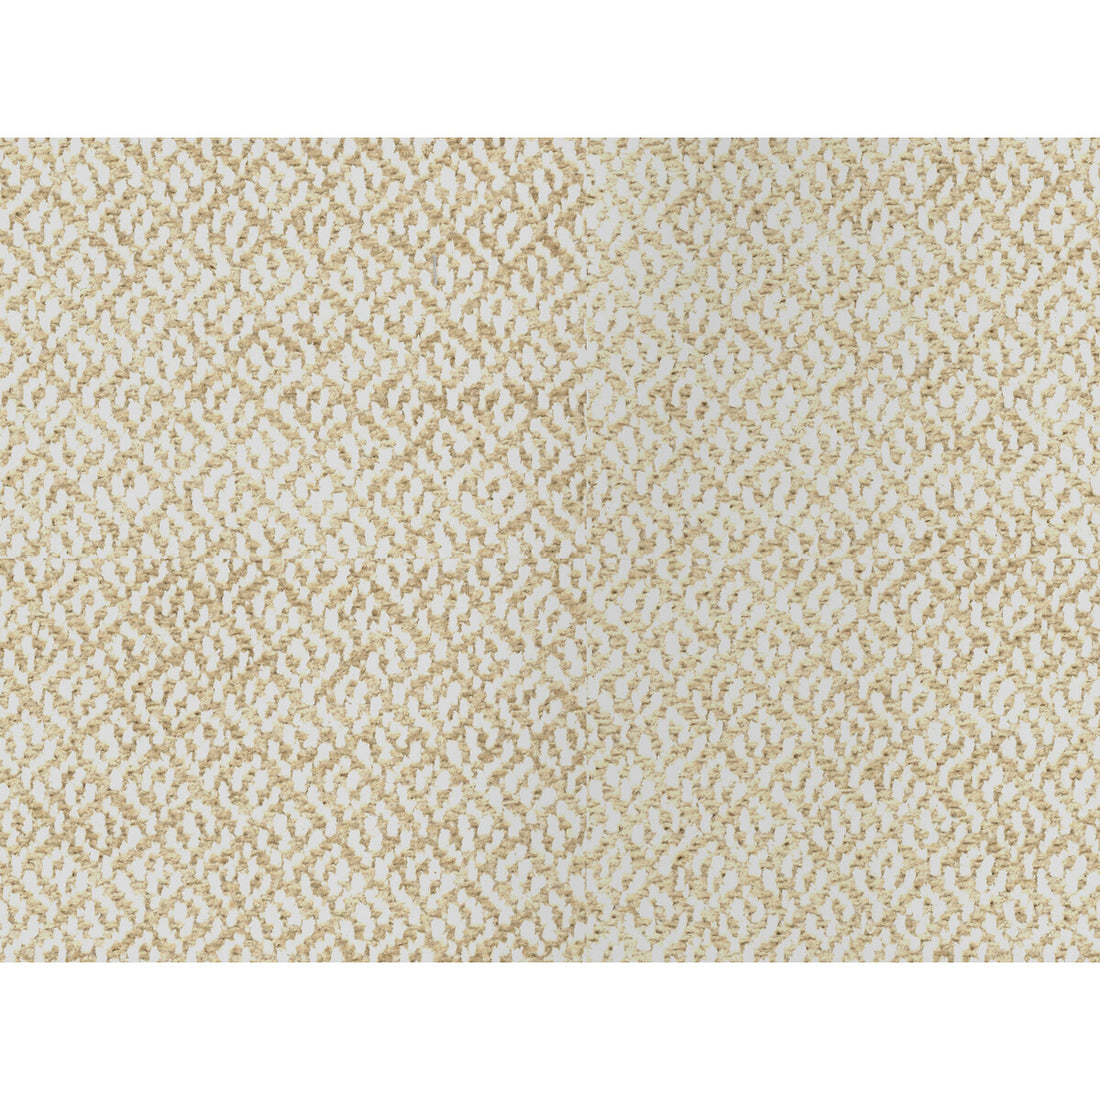 Cottian Chenille fabric in oyster color - pattern 8016110.1.0 - by Brunschwig &amp; Fils in the Chambery Textures collection